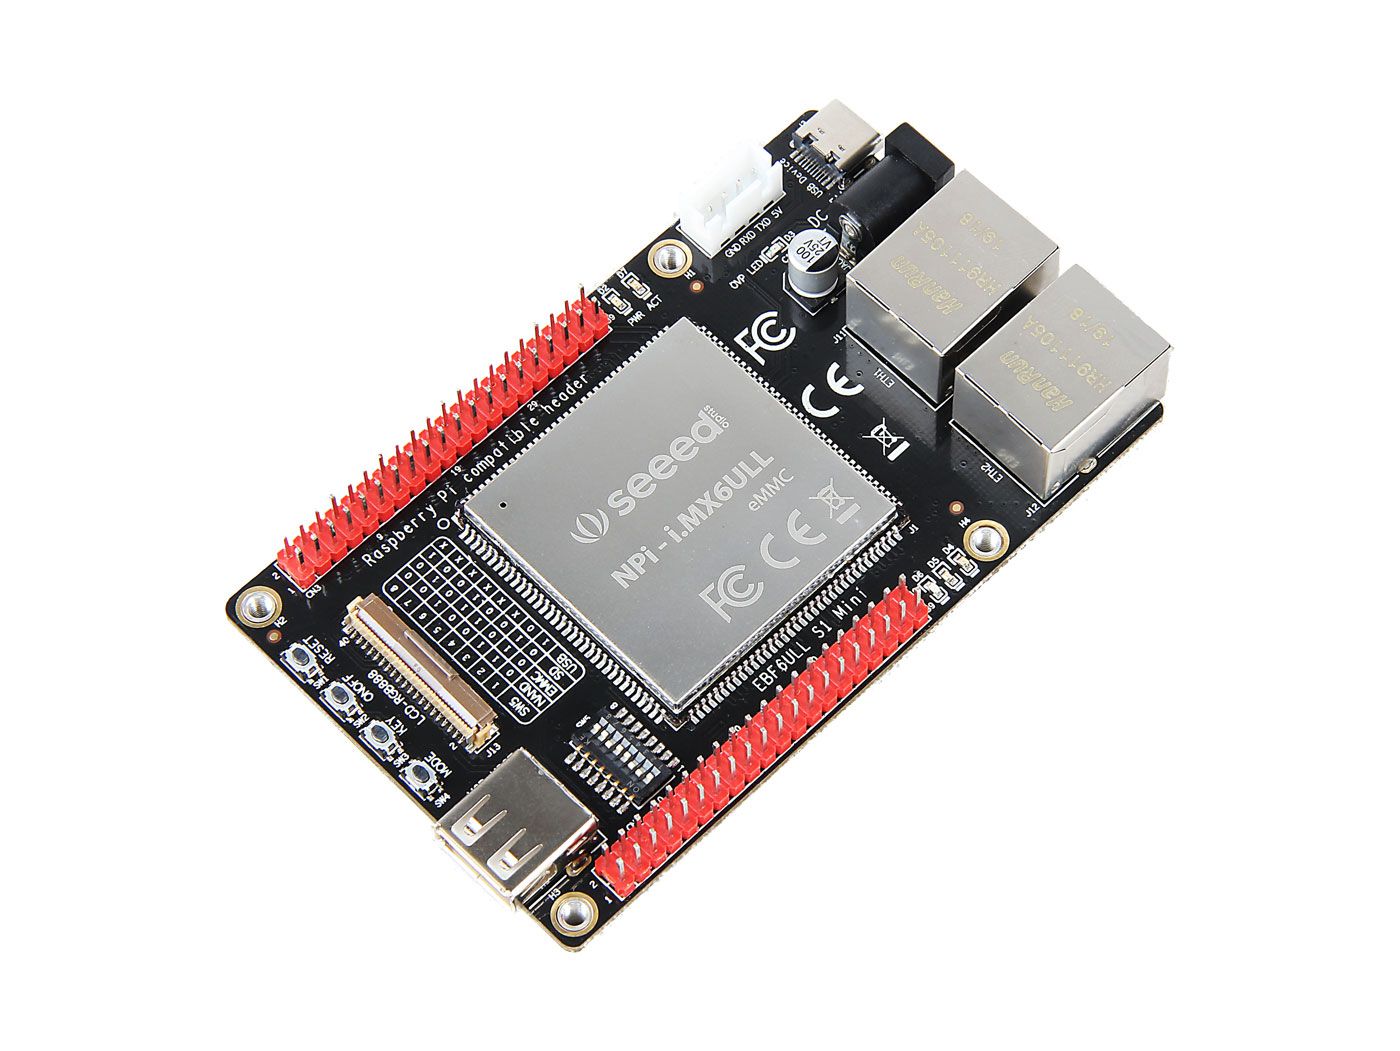 Seeed Opens Pre-Orders for NPi i.MX6ULL Dual-Ethernet Dev Board